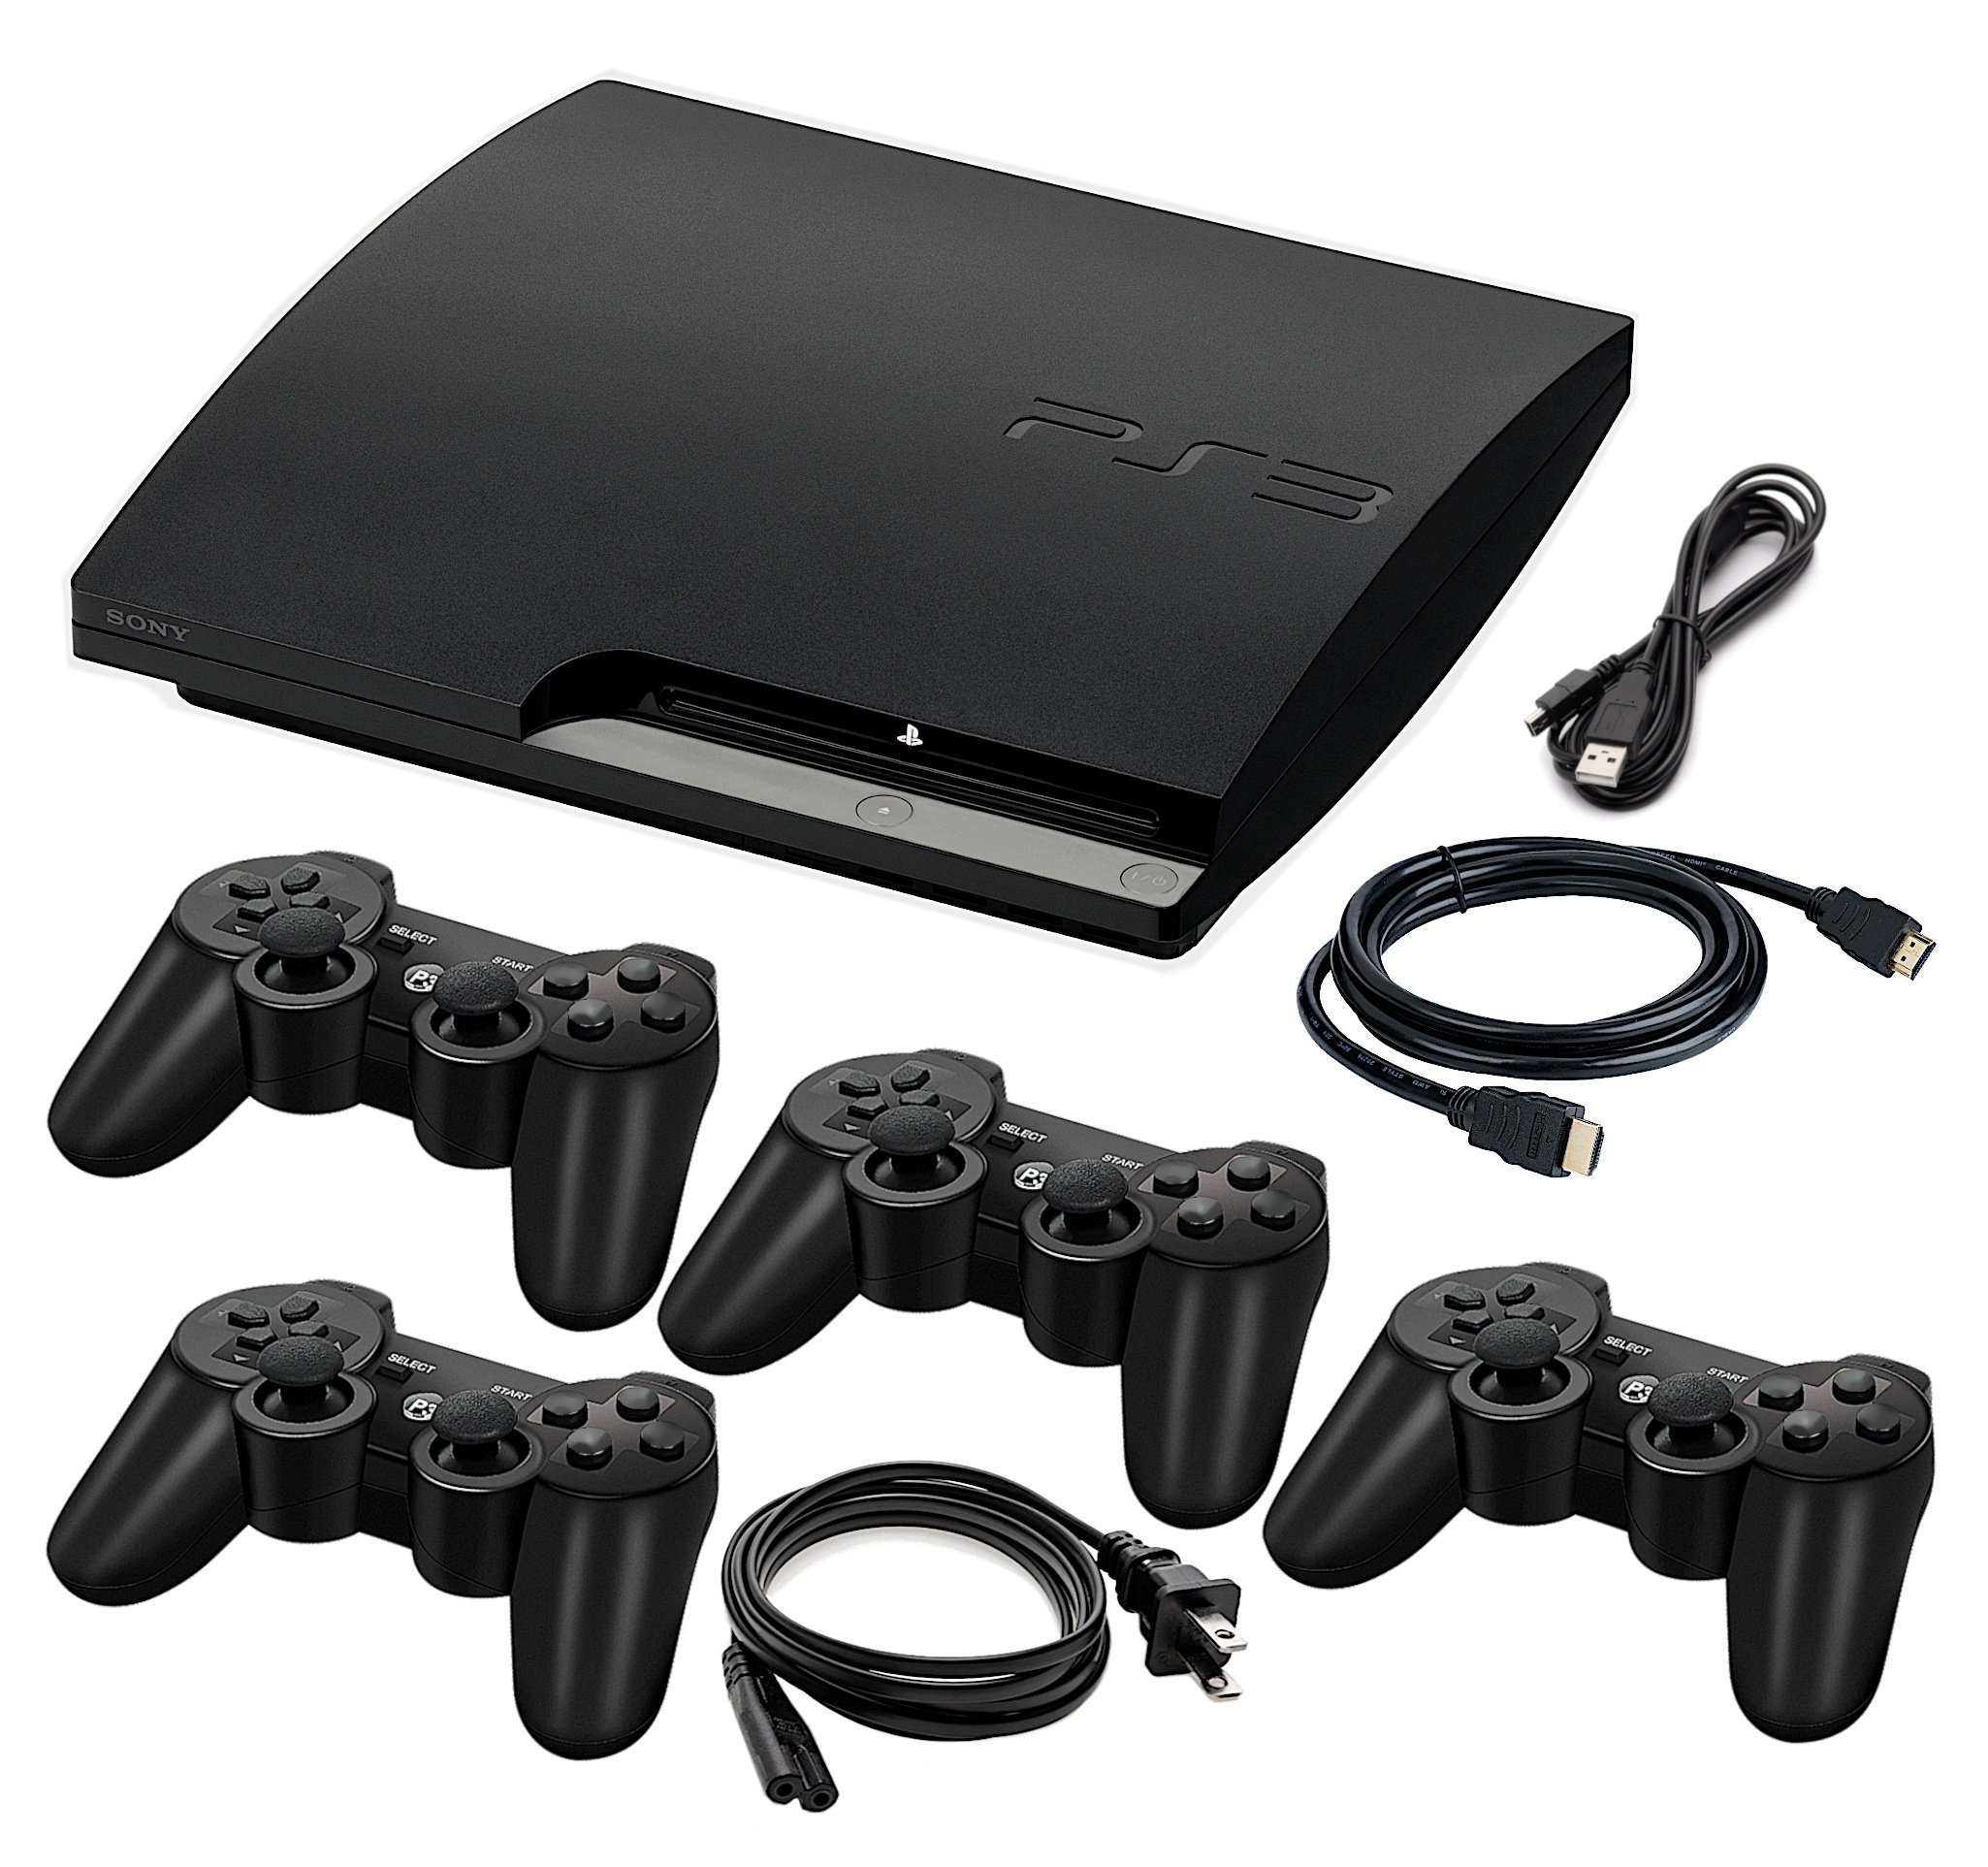 Sony Playstation 3 PS3 Video Games Choose your favorite Fast Free Shipping